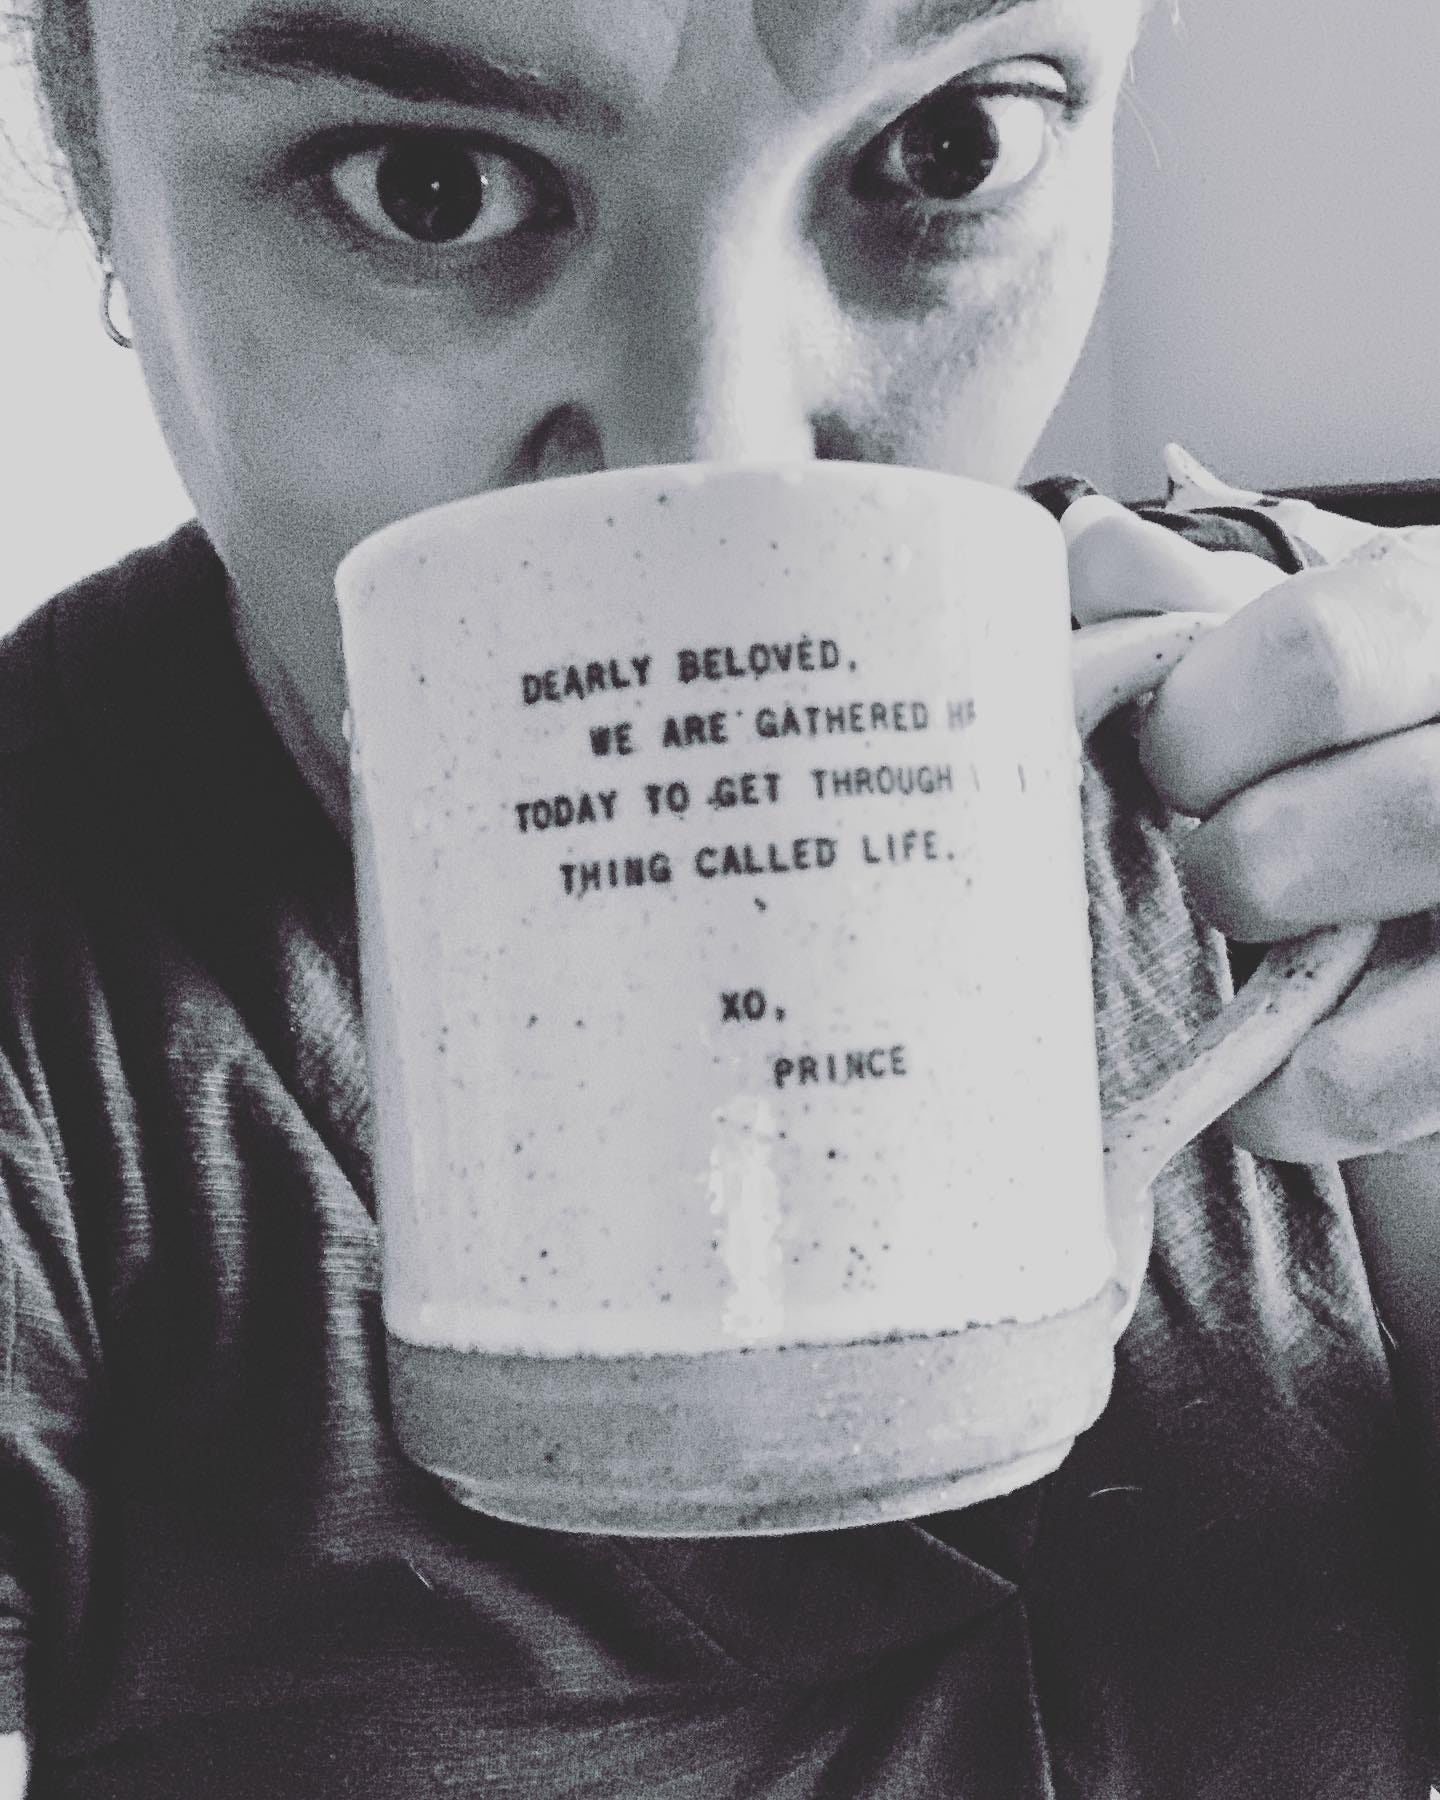 A woman with her hair in a bun and large brown eyes drinking out of a coffee mug that has the Prince lyrics "Dearly Beloved, we are gathered here today to get through this thing called life." printed on the side